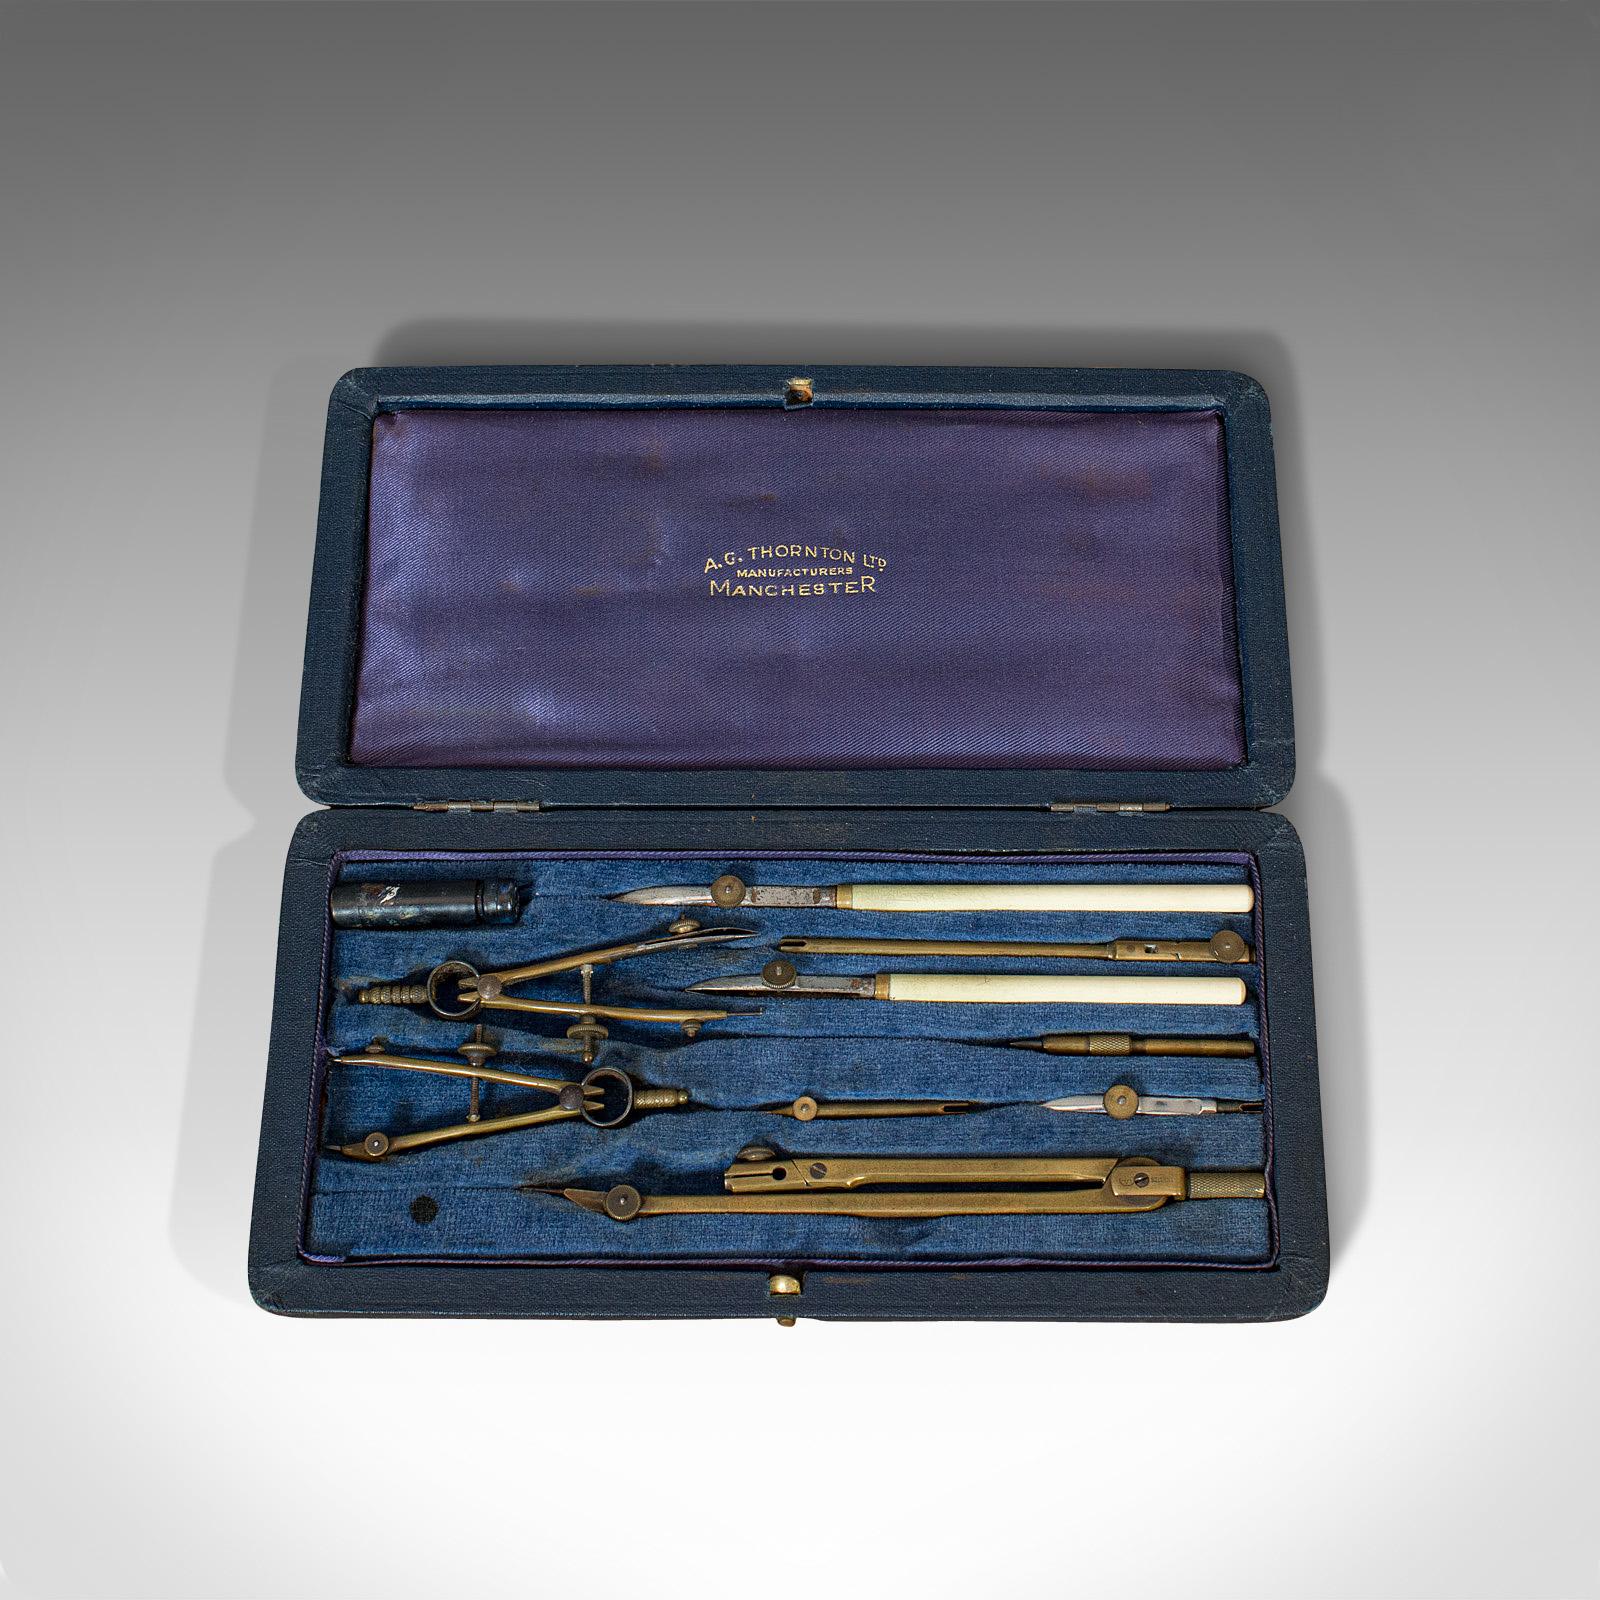 This is a vintage draughtsman's technical drawing case. An English, brass and silver nickel instrument set, dating to the early 20th century, circa 1930.

Useful set of instruments with appealing finish
Displaying a desirable aged patina
Brass